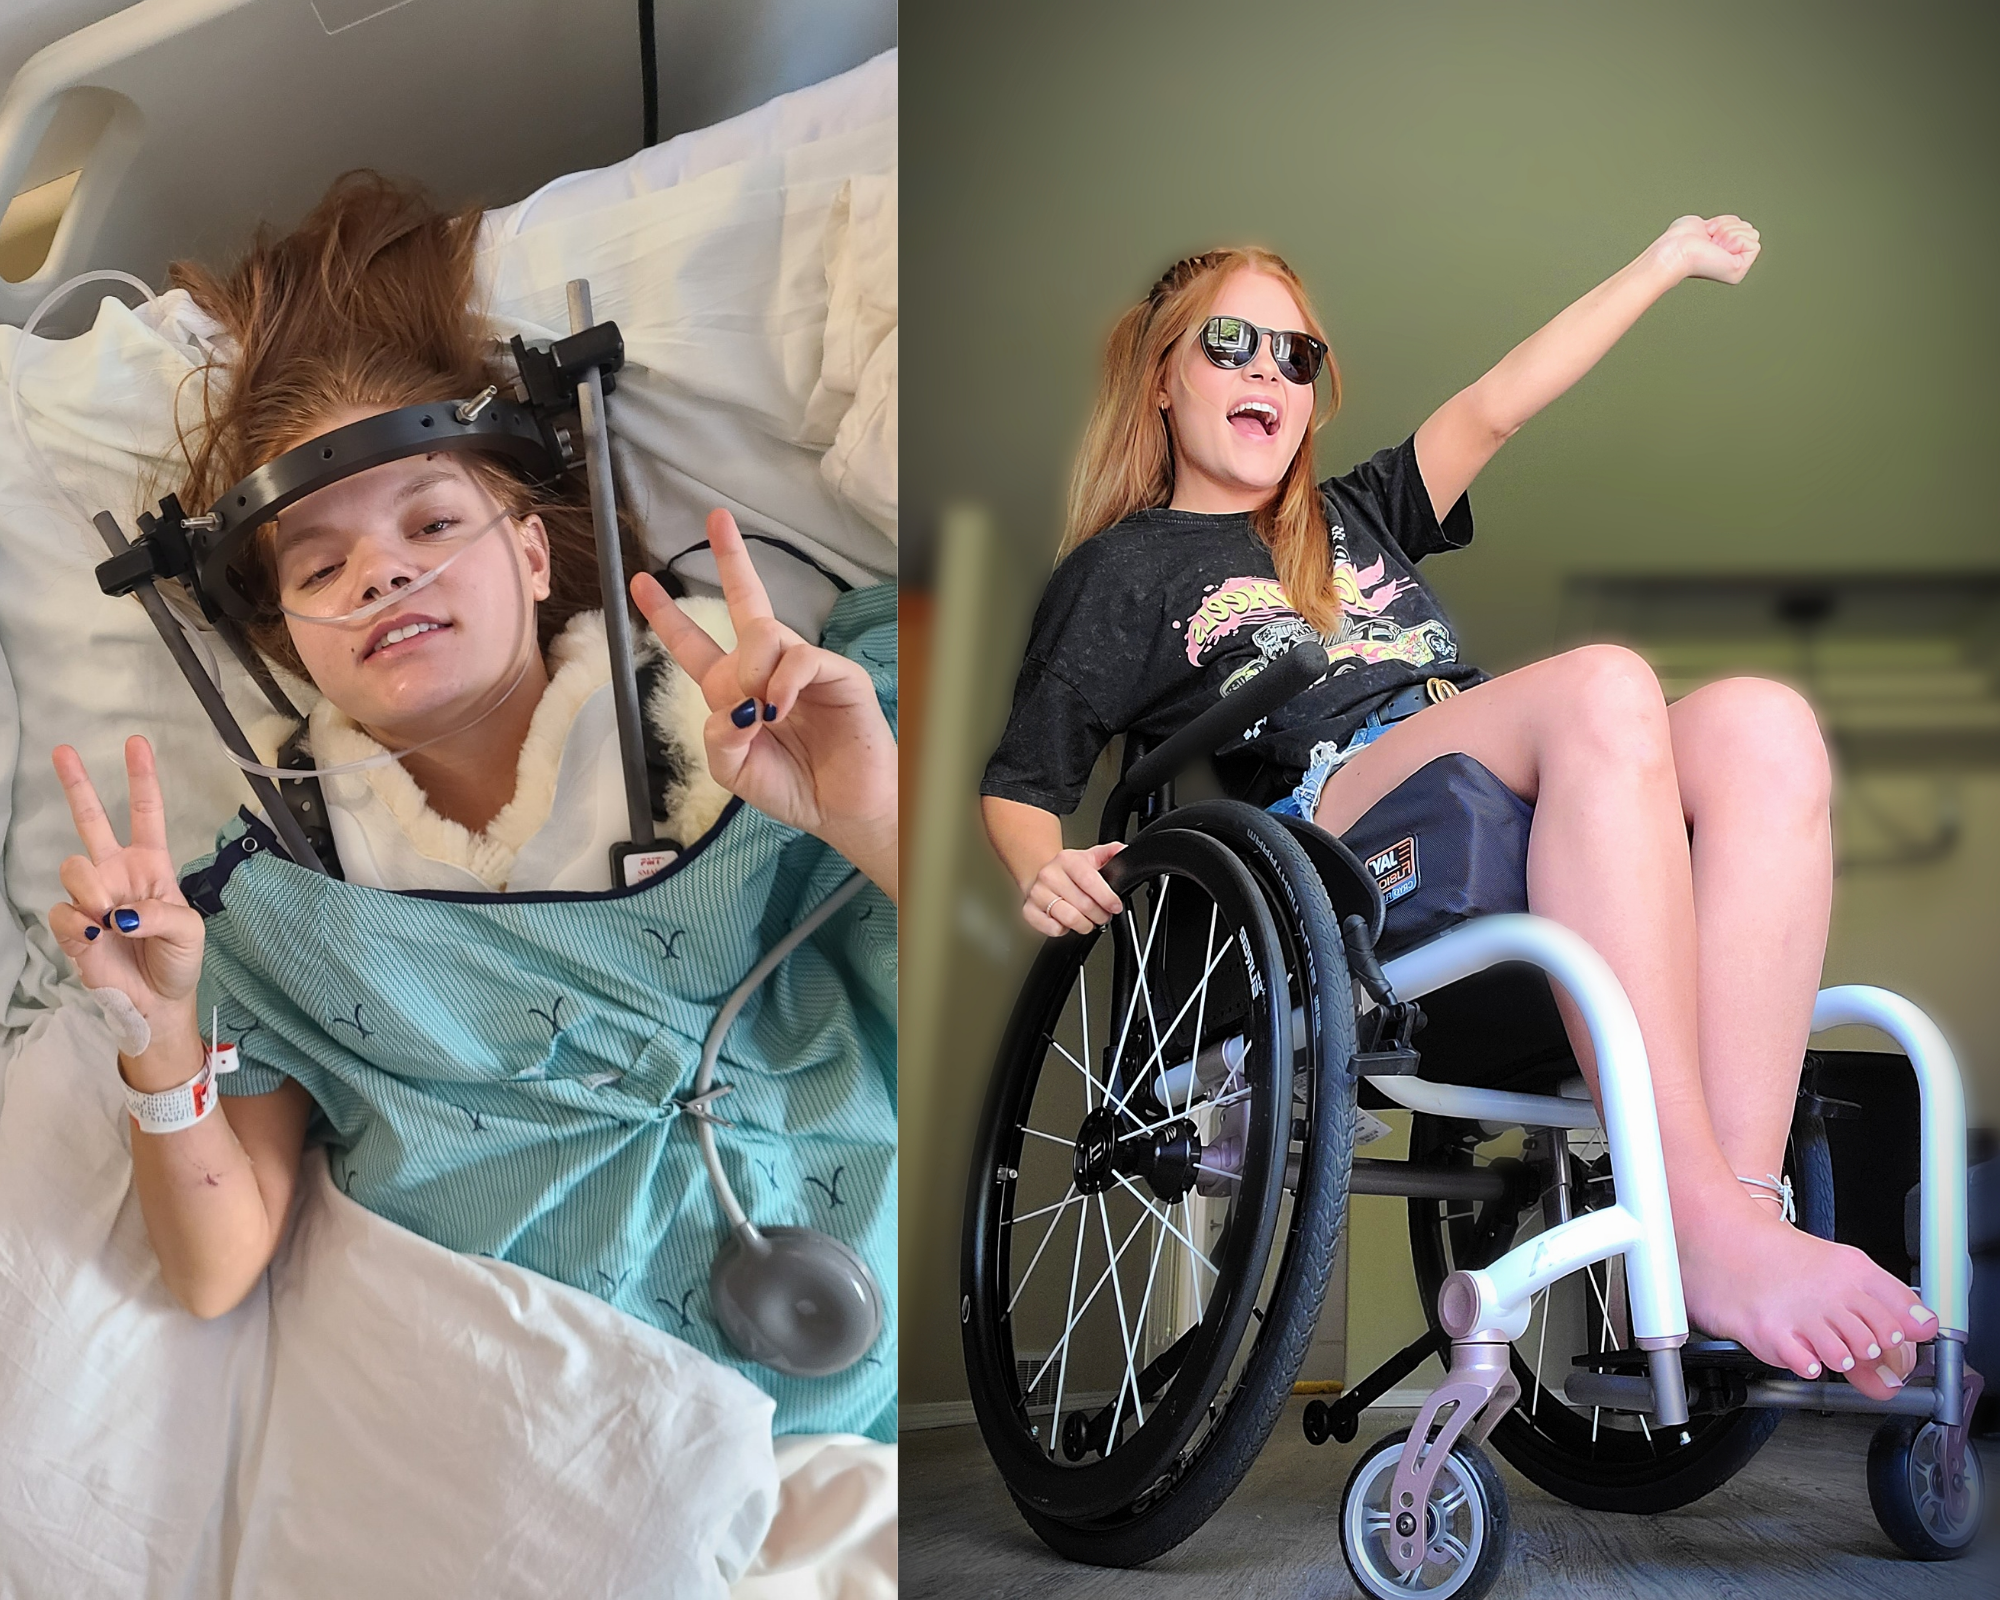 Motion Client Ambassador Brianna Seewald split across two photos. On left in hospital bed with halo holding up peace signs and on right smiling with left arm up and sitting in manual wheelchair